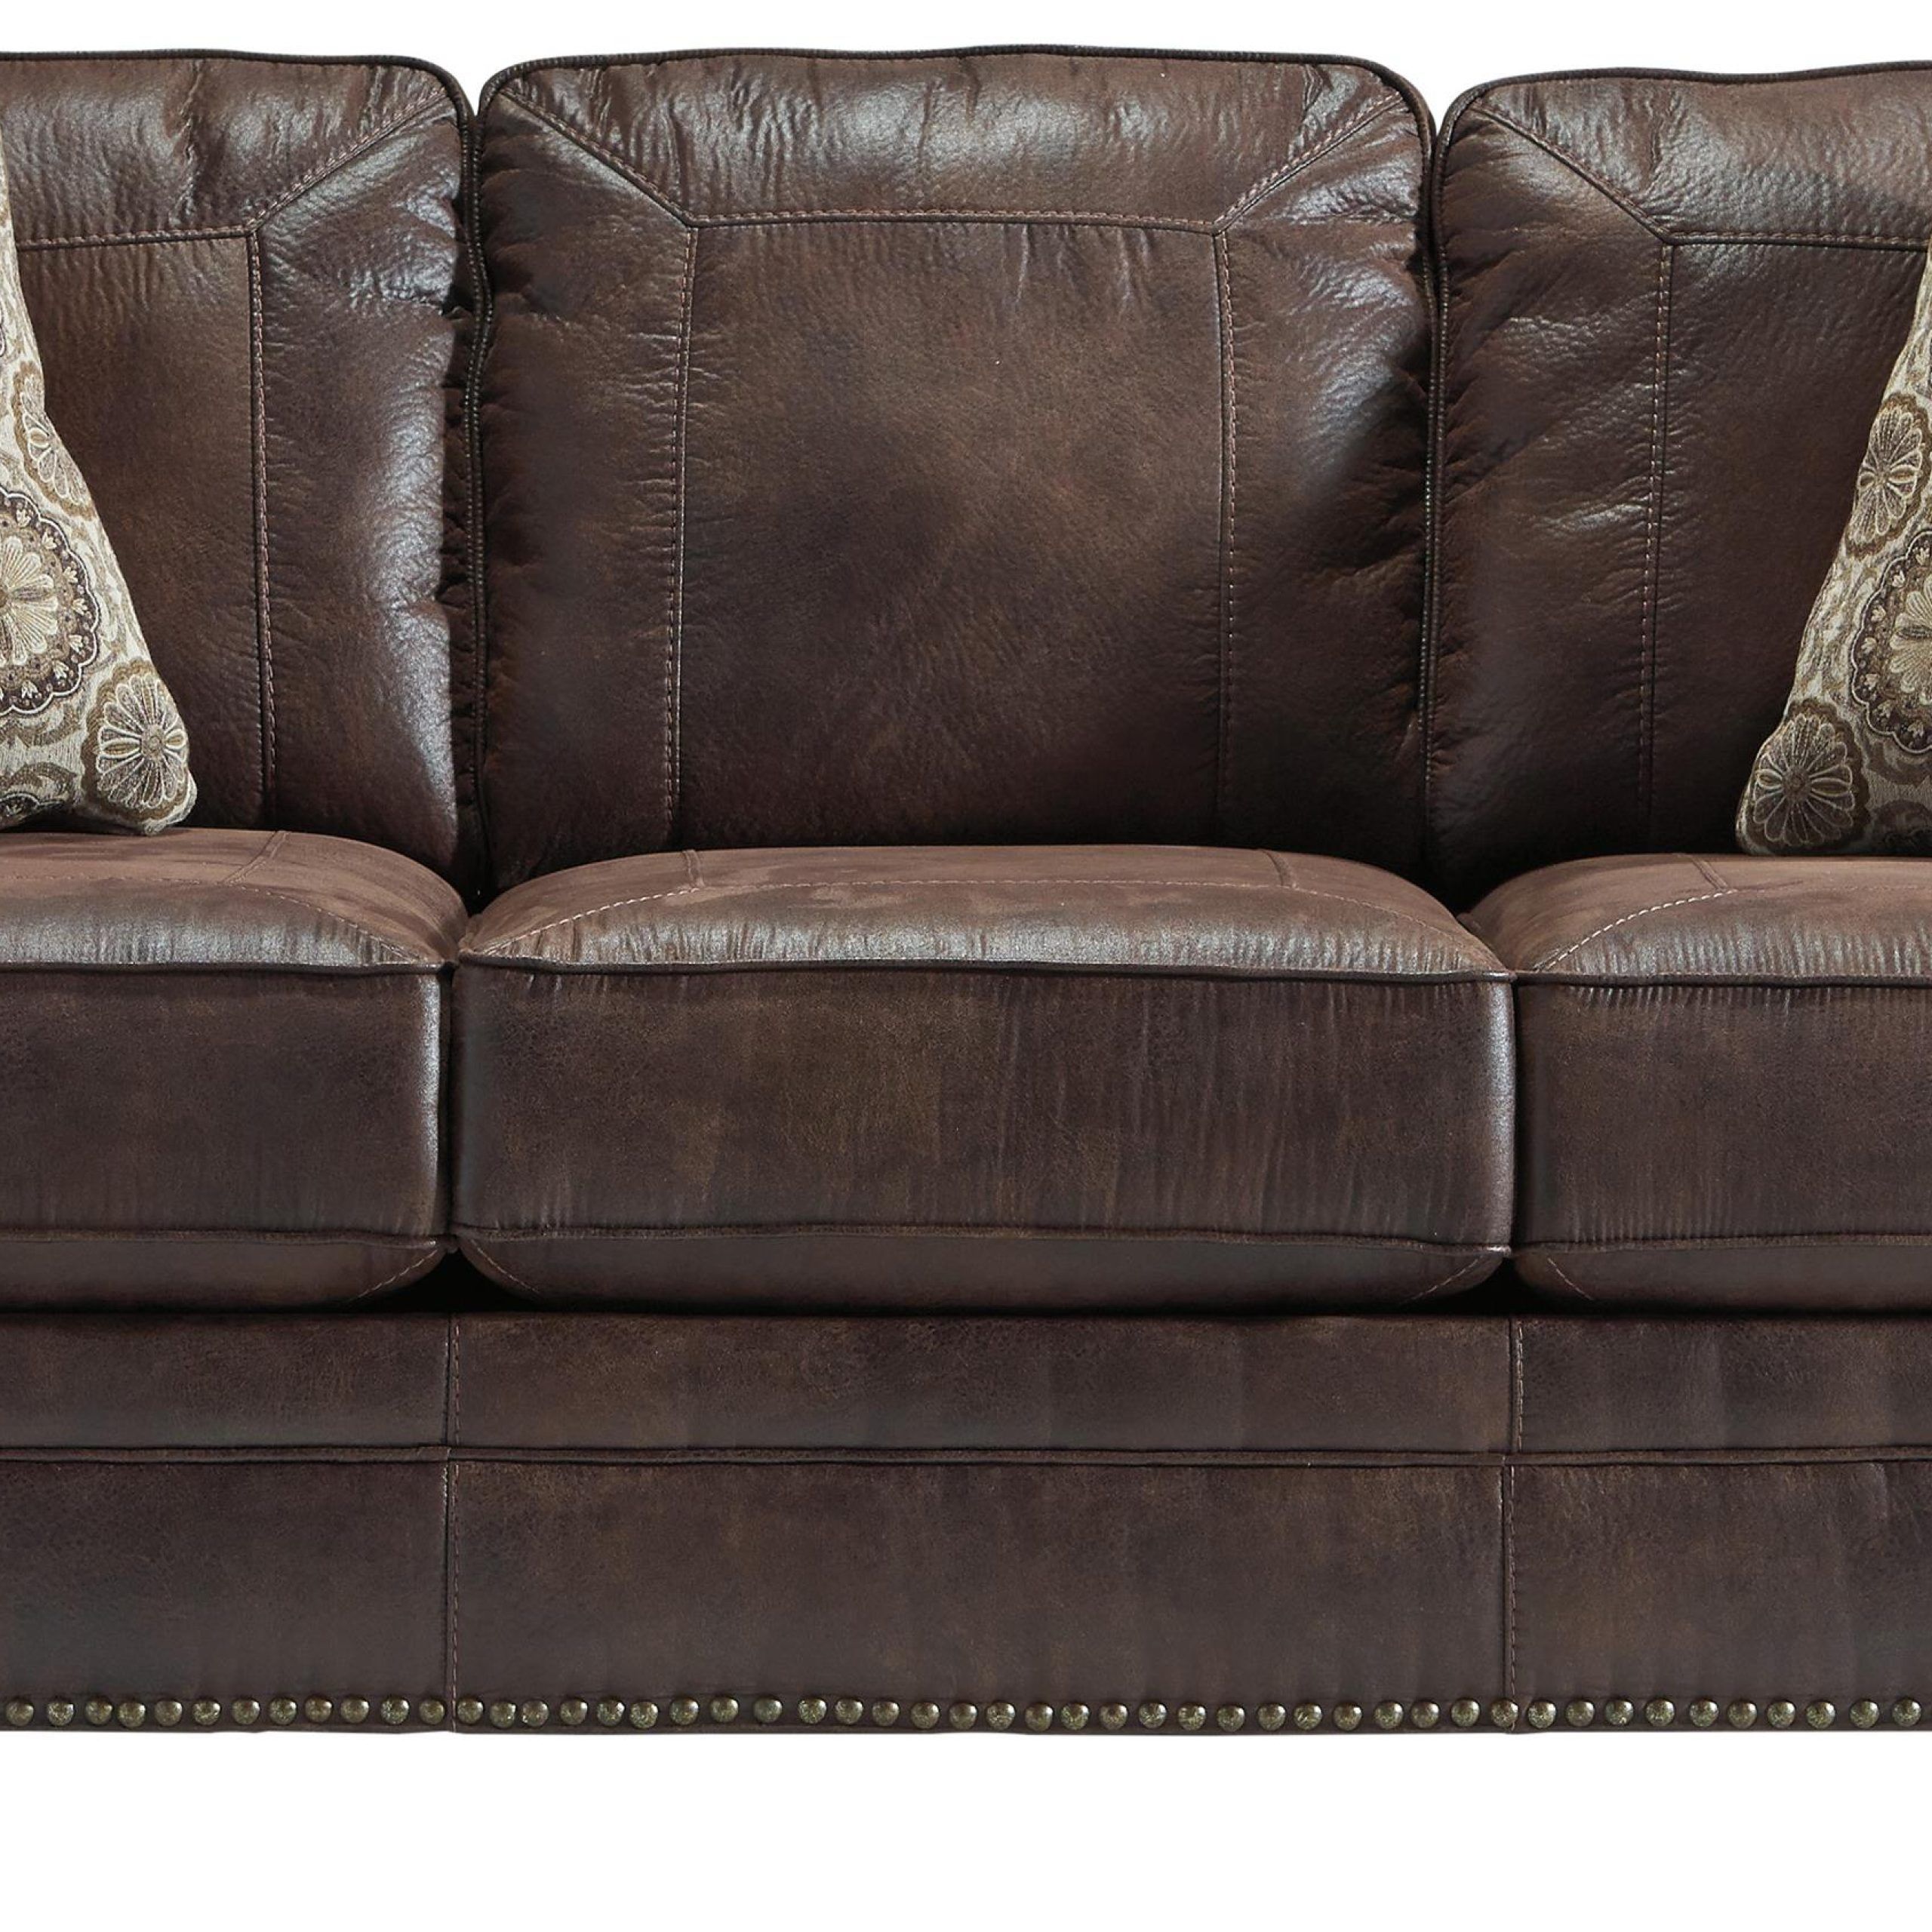 Benchcraft Breville 8000338 Faux Leather Sofa With Rolled Arms And With Regard To Faux Leather Sofas (View 5 of 21)